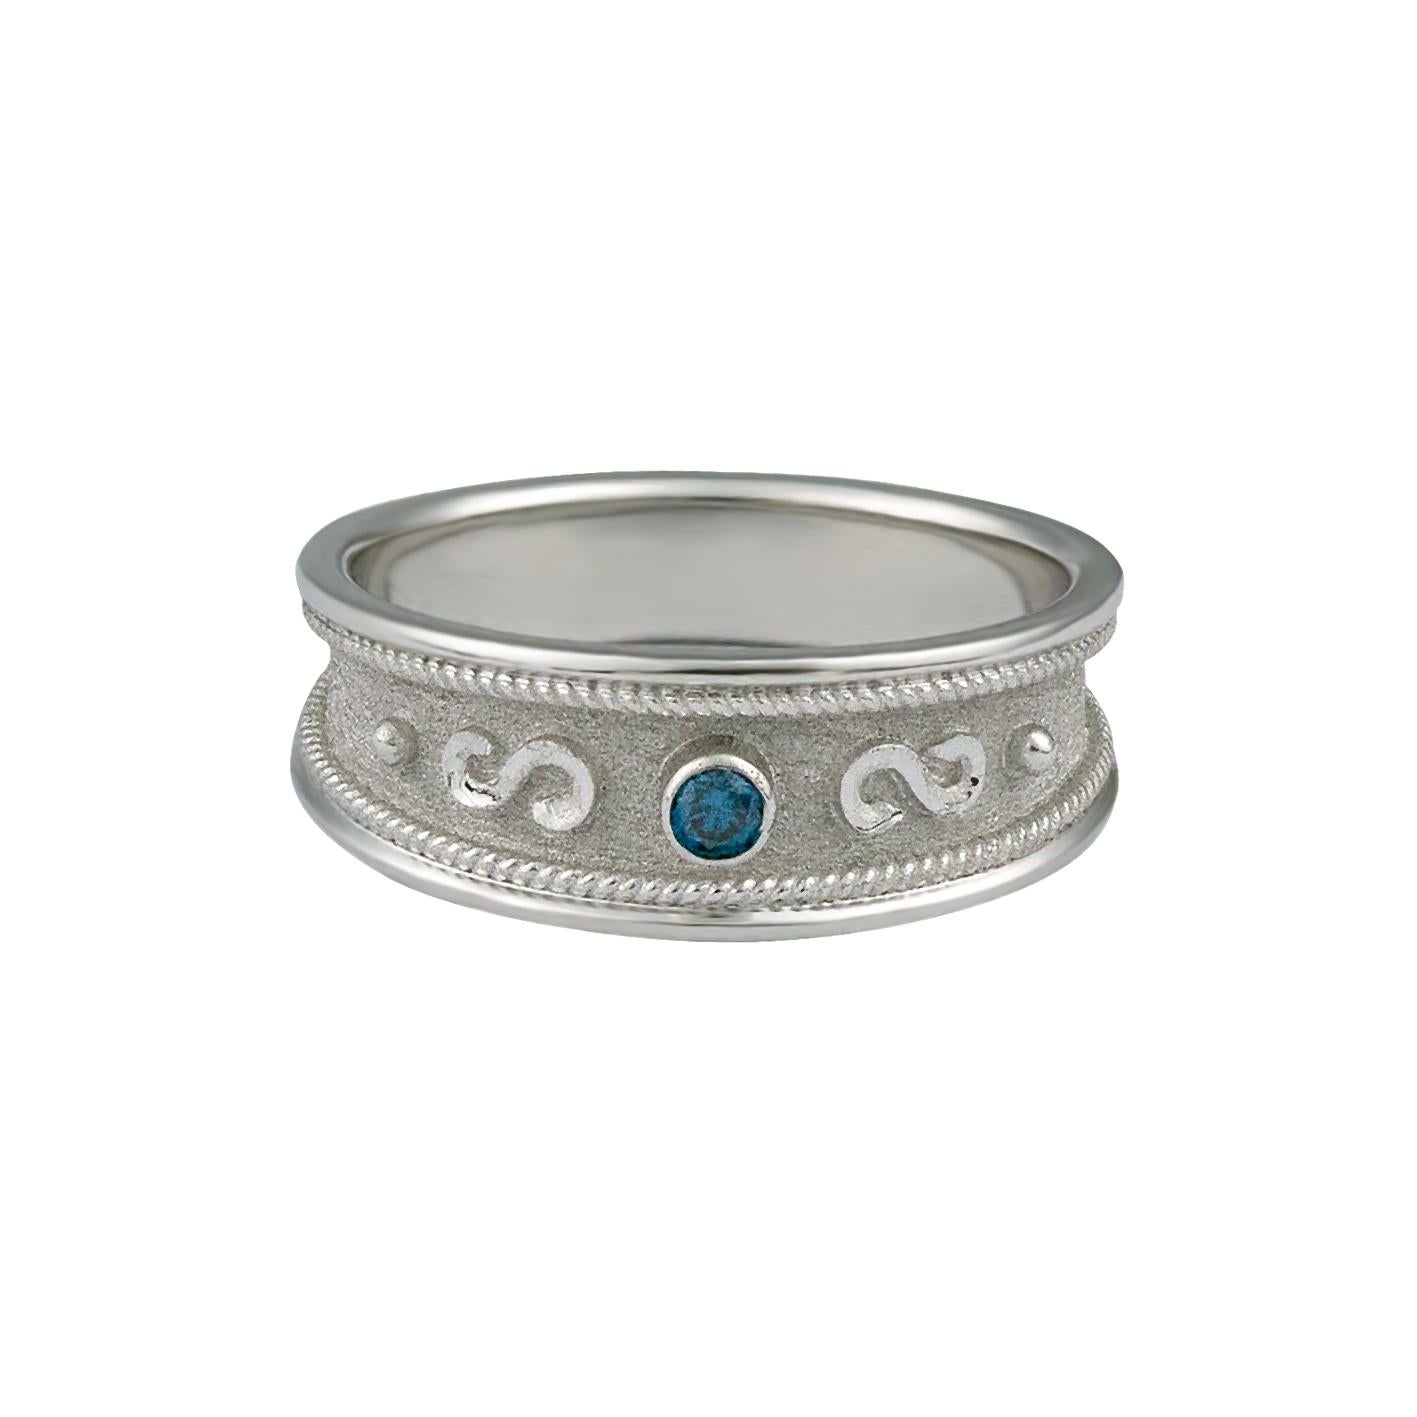 S.Georgios designer Band Ring is handmade from solid 18 Karat White Gold all custom-made. The stunning ring is microscopically decorated with white gold wires -granulated details contrast with a unique Byzantine velvet background. This beautiful